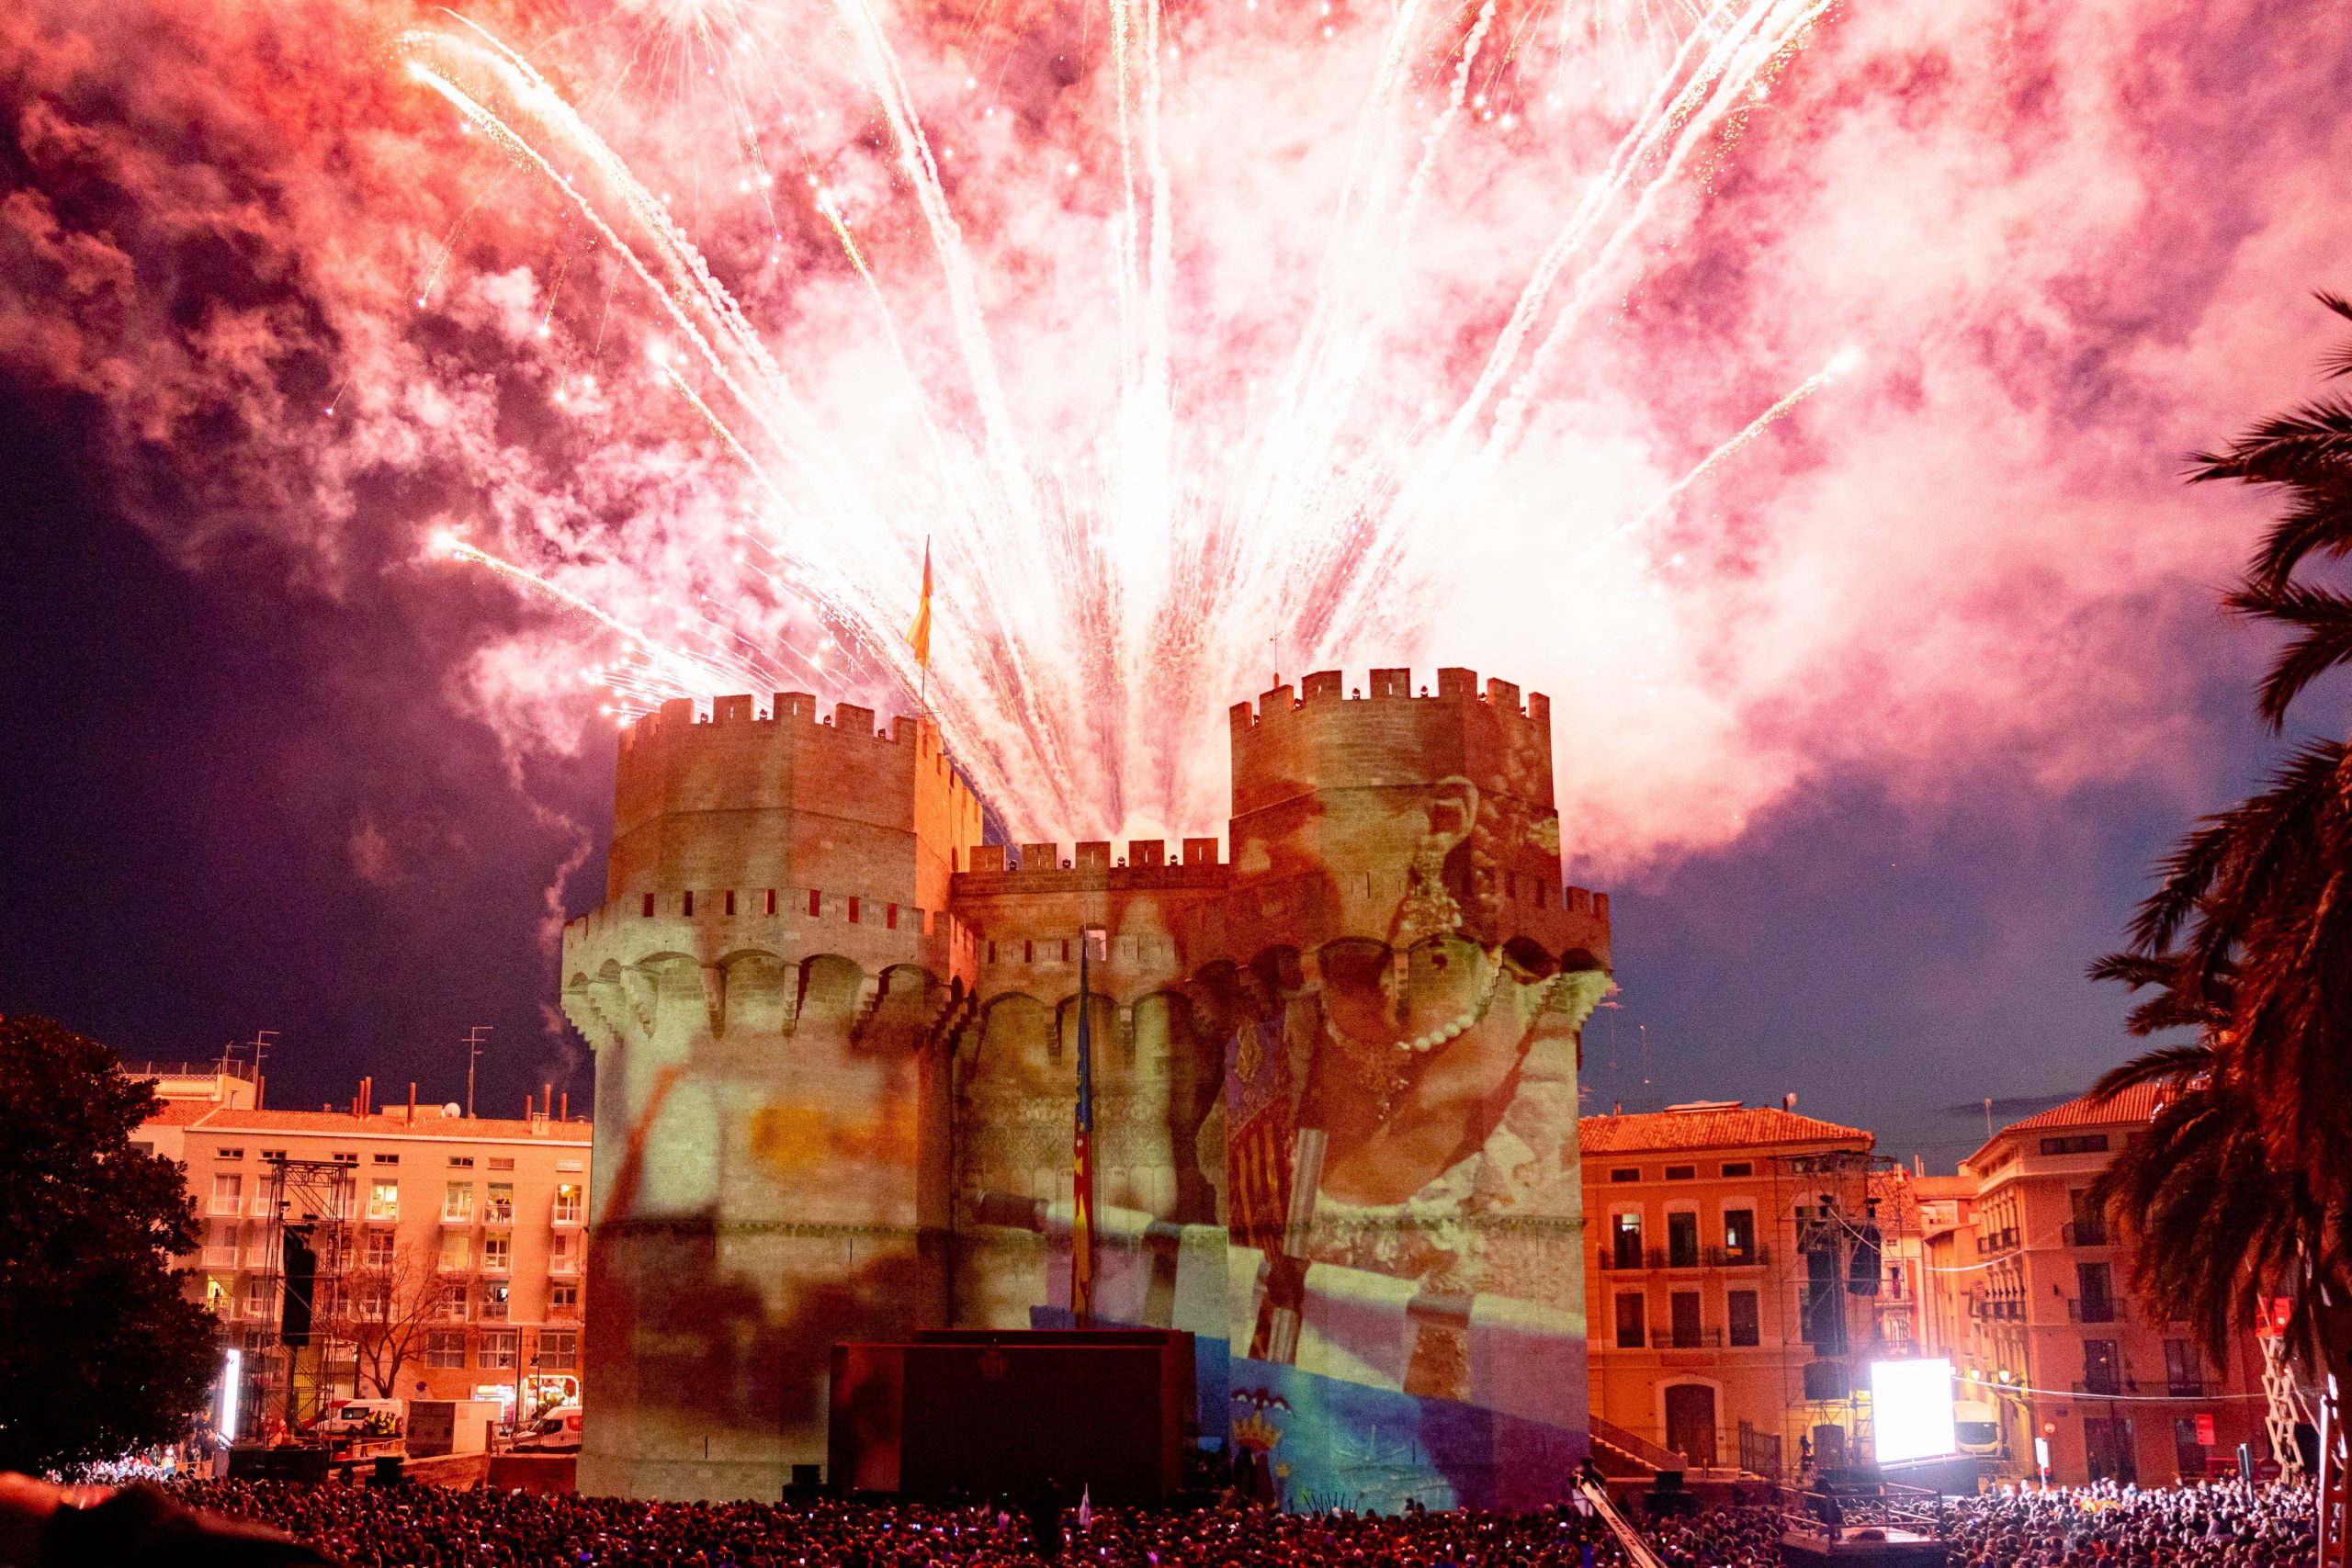 Spectacular world-famous Fallas featuring fireworks and giant statues returns to Spain's Valencia